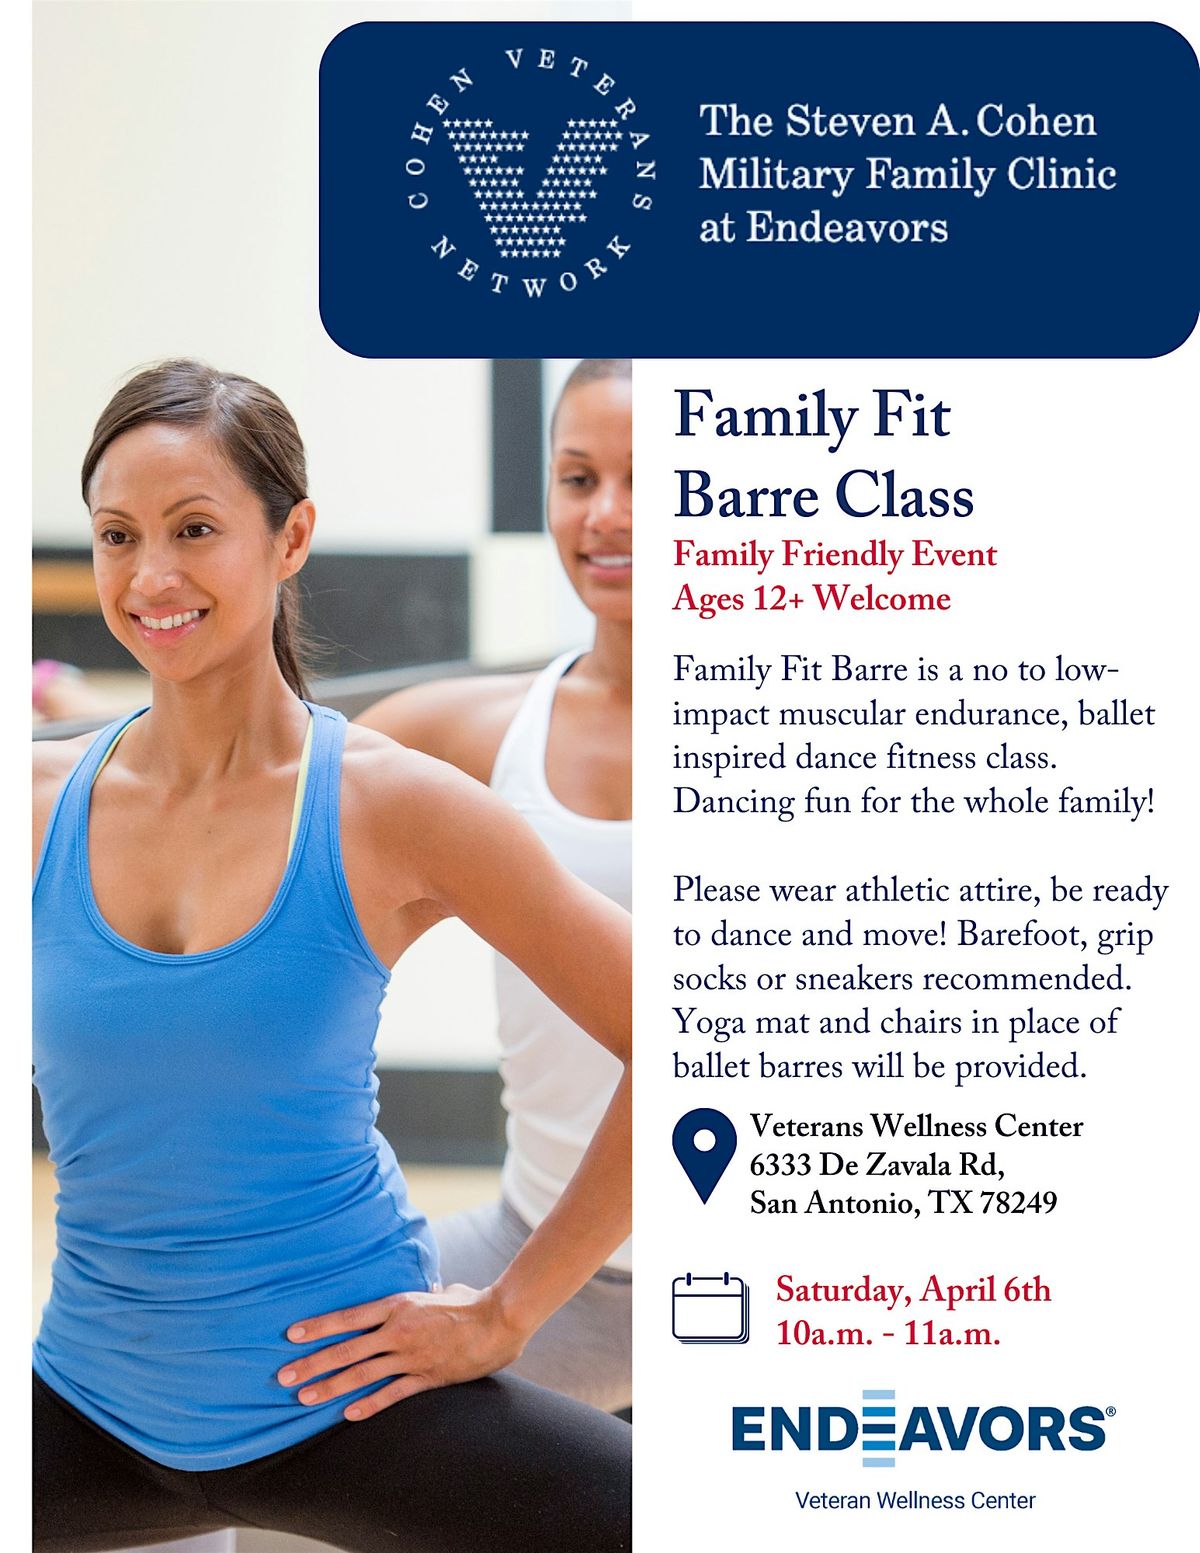 Family Fit Barre Class